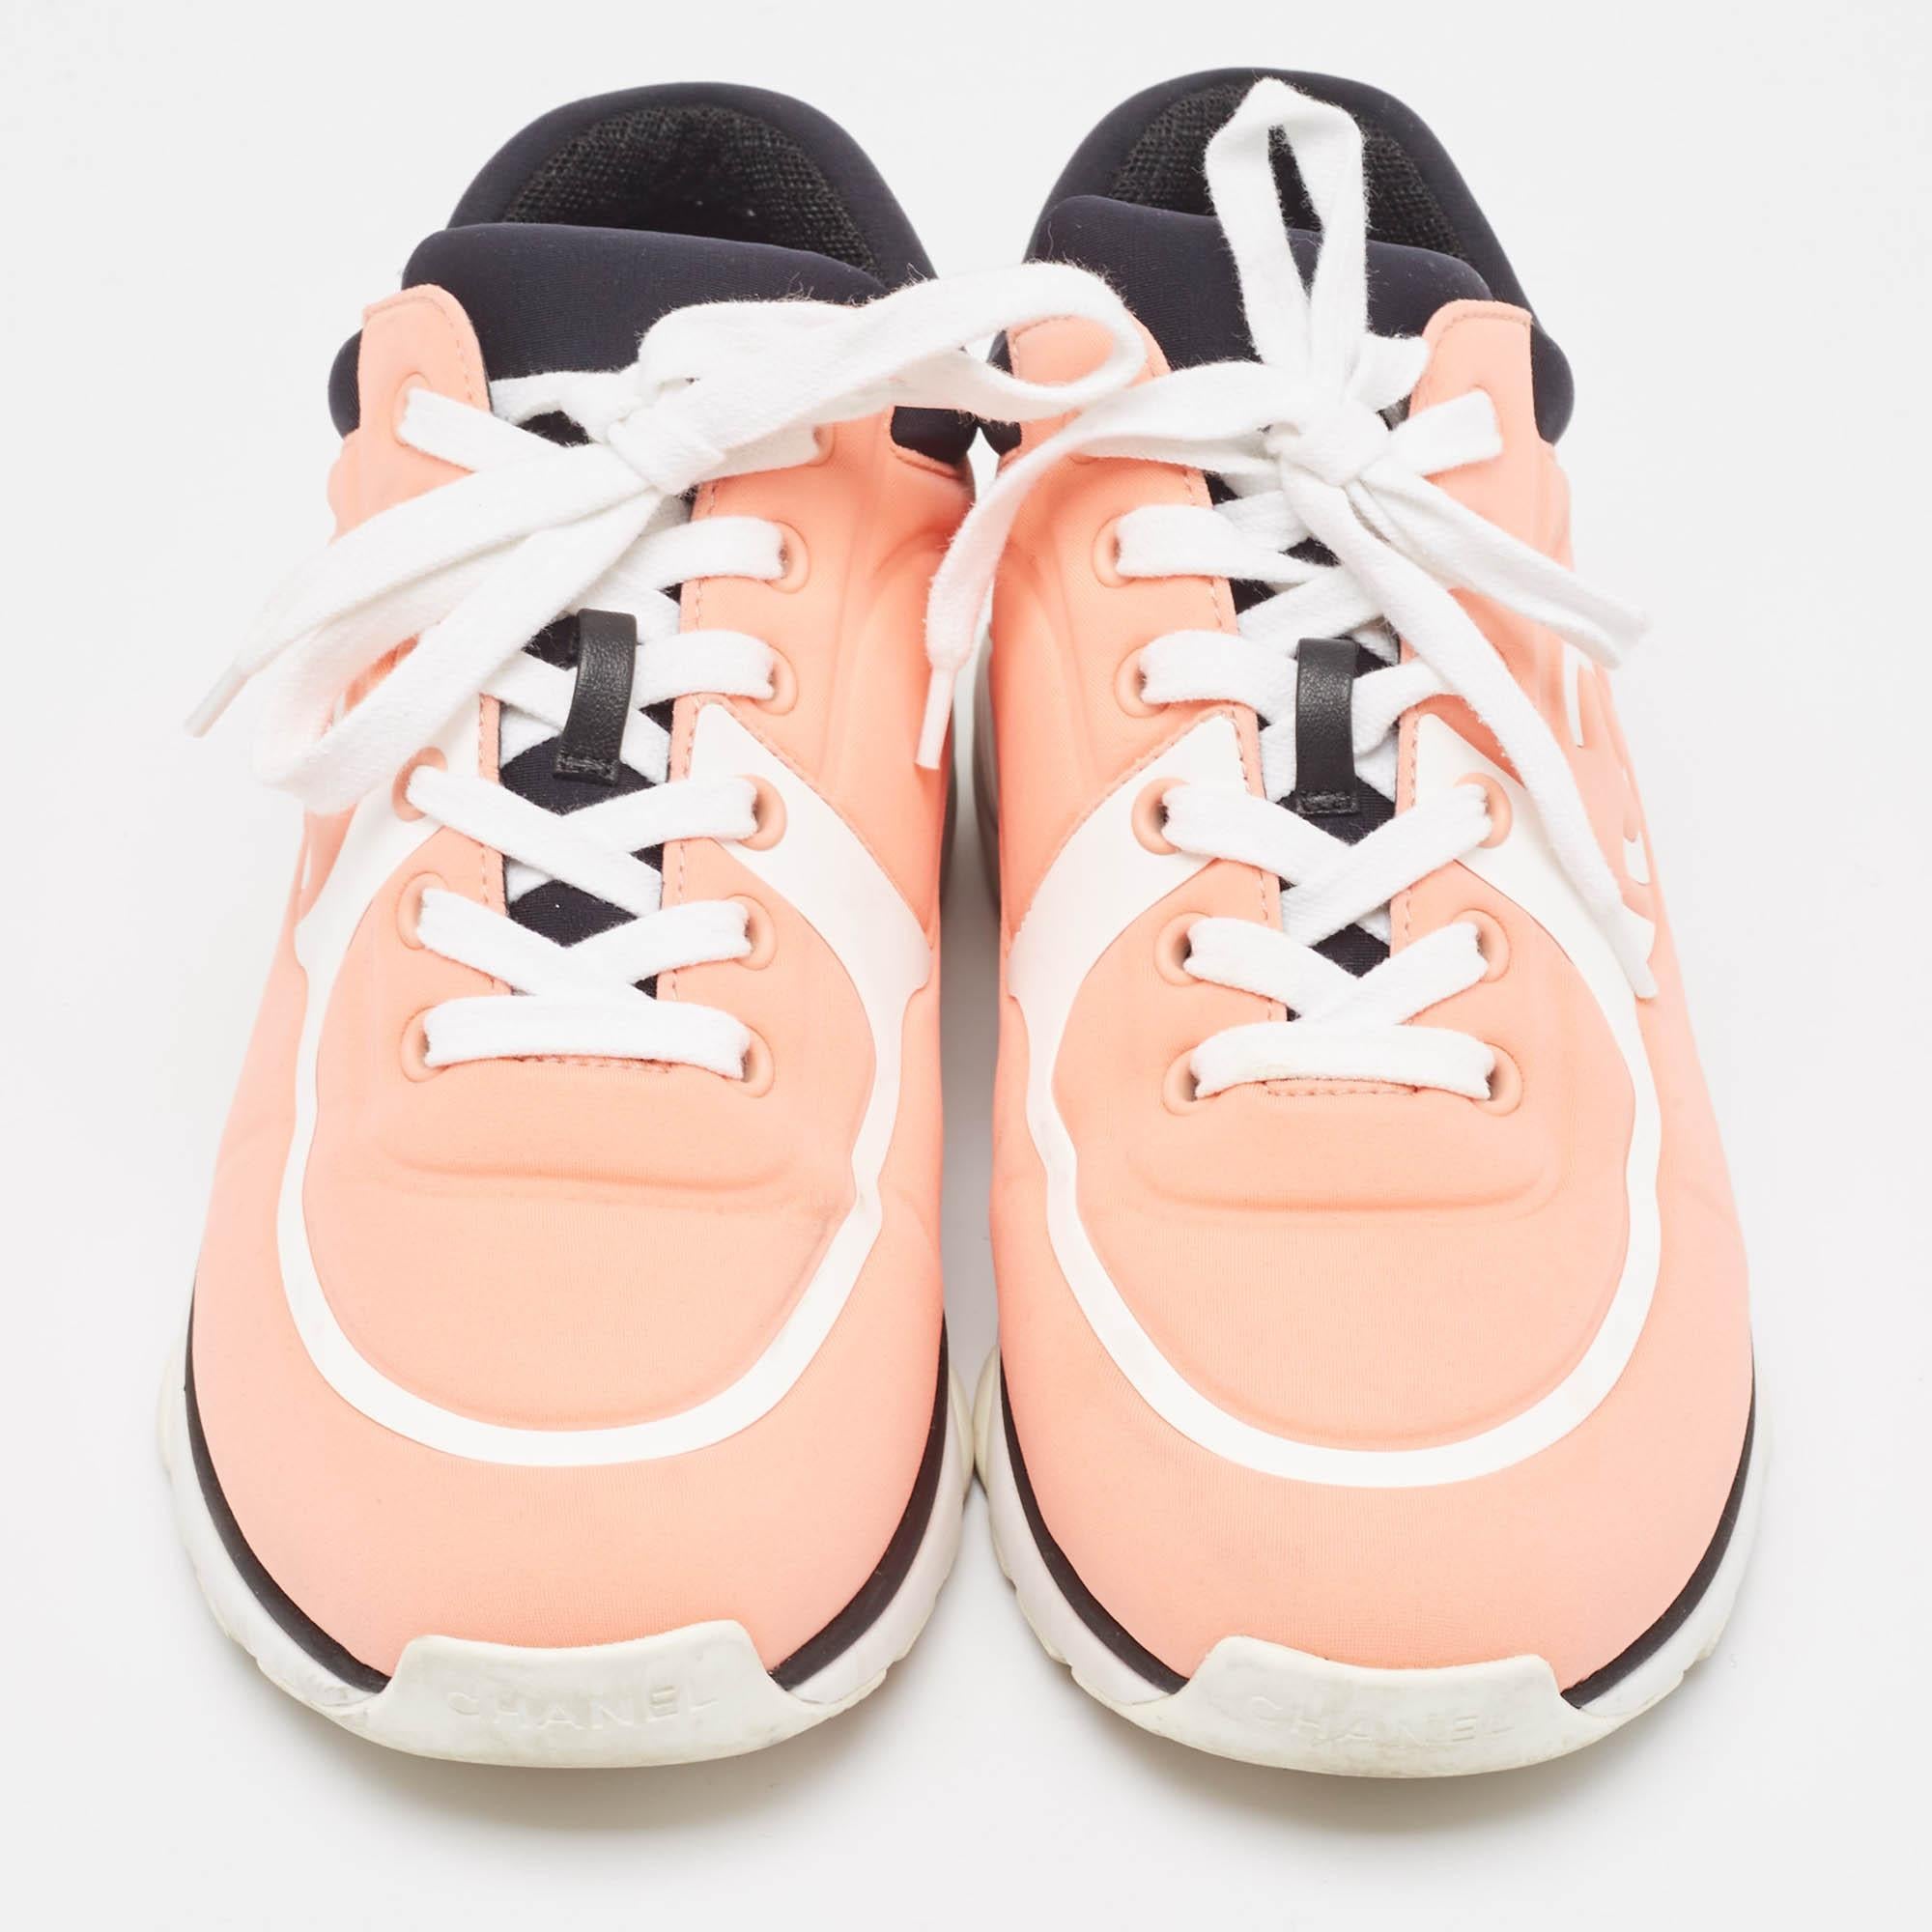 Add a touch of luxury to your casual-sporty look with these amazing Chanel sneakers. Beautifully constructed with neoprene, they feature round toes and the iconic CC logo detailing on the sides. The lace-ups complete this coral pink & white pair